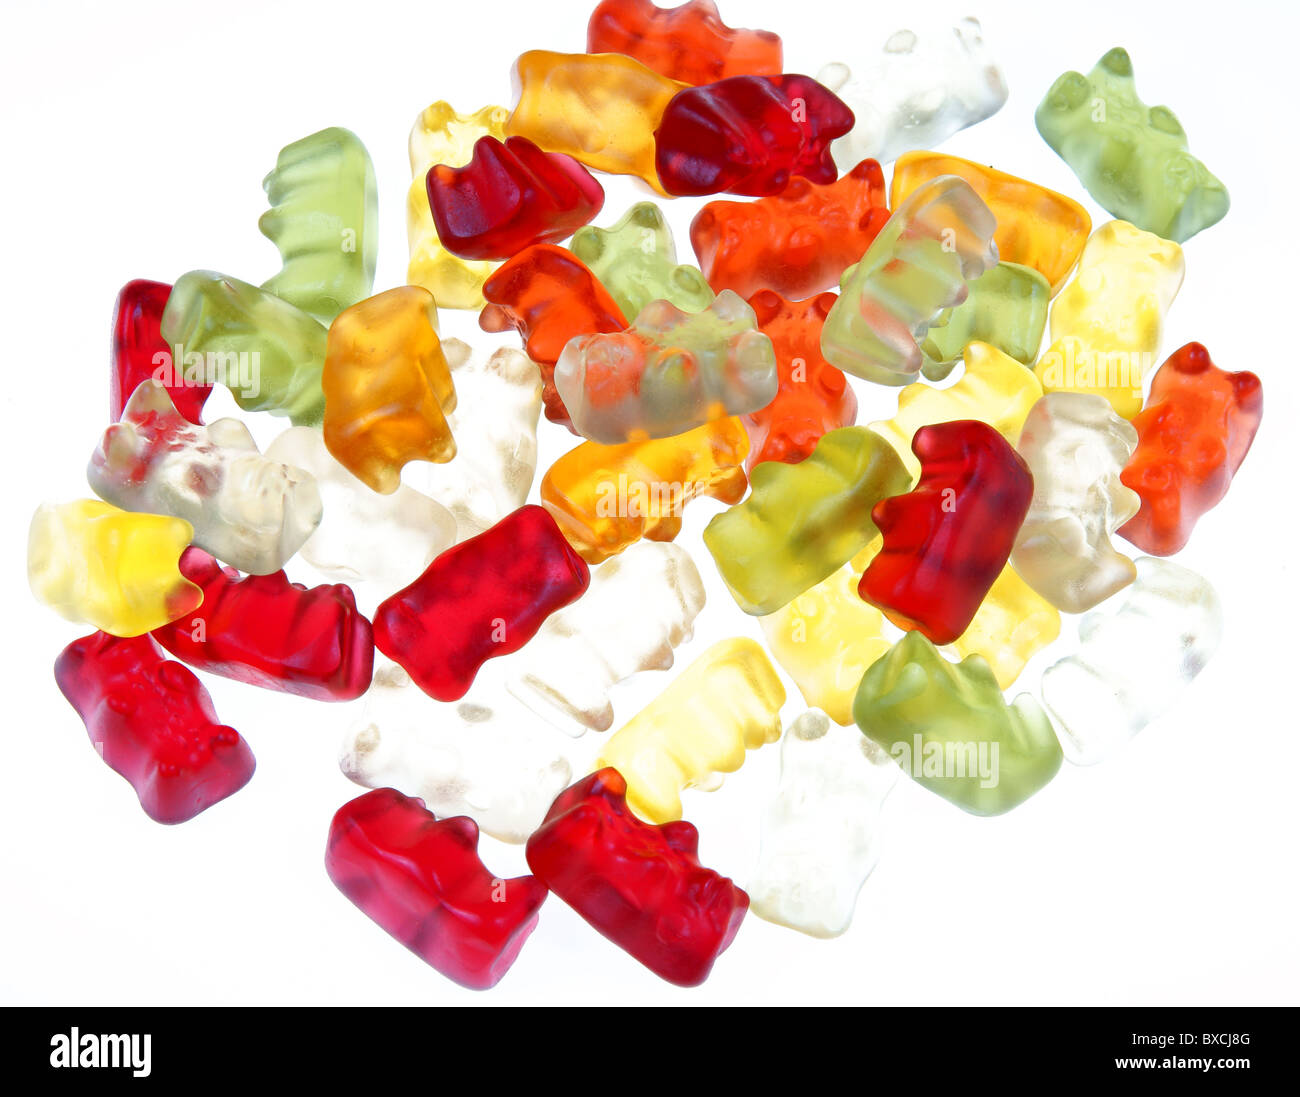 Gummy bears aragment as stack isolated on white Stock Photo